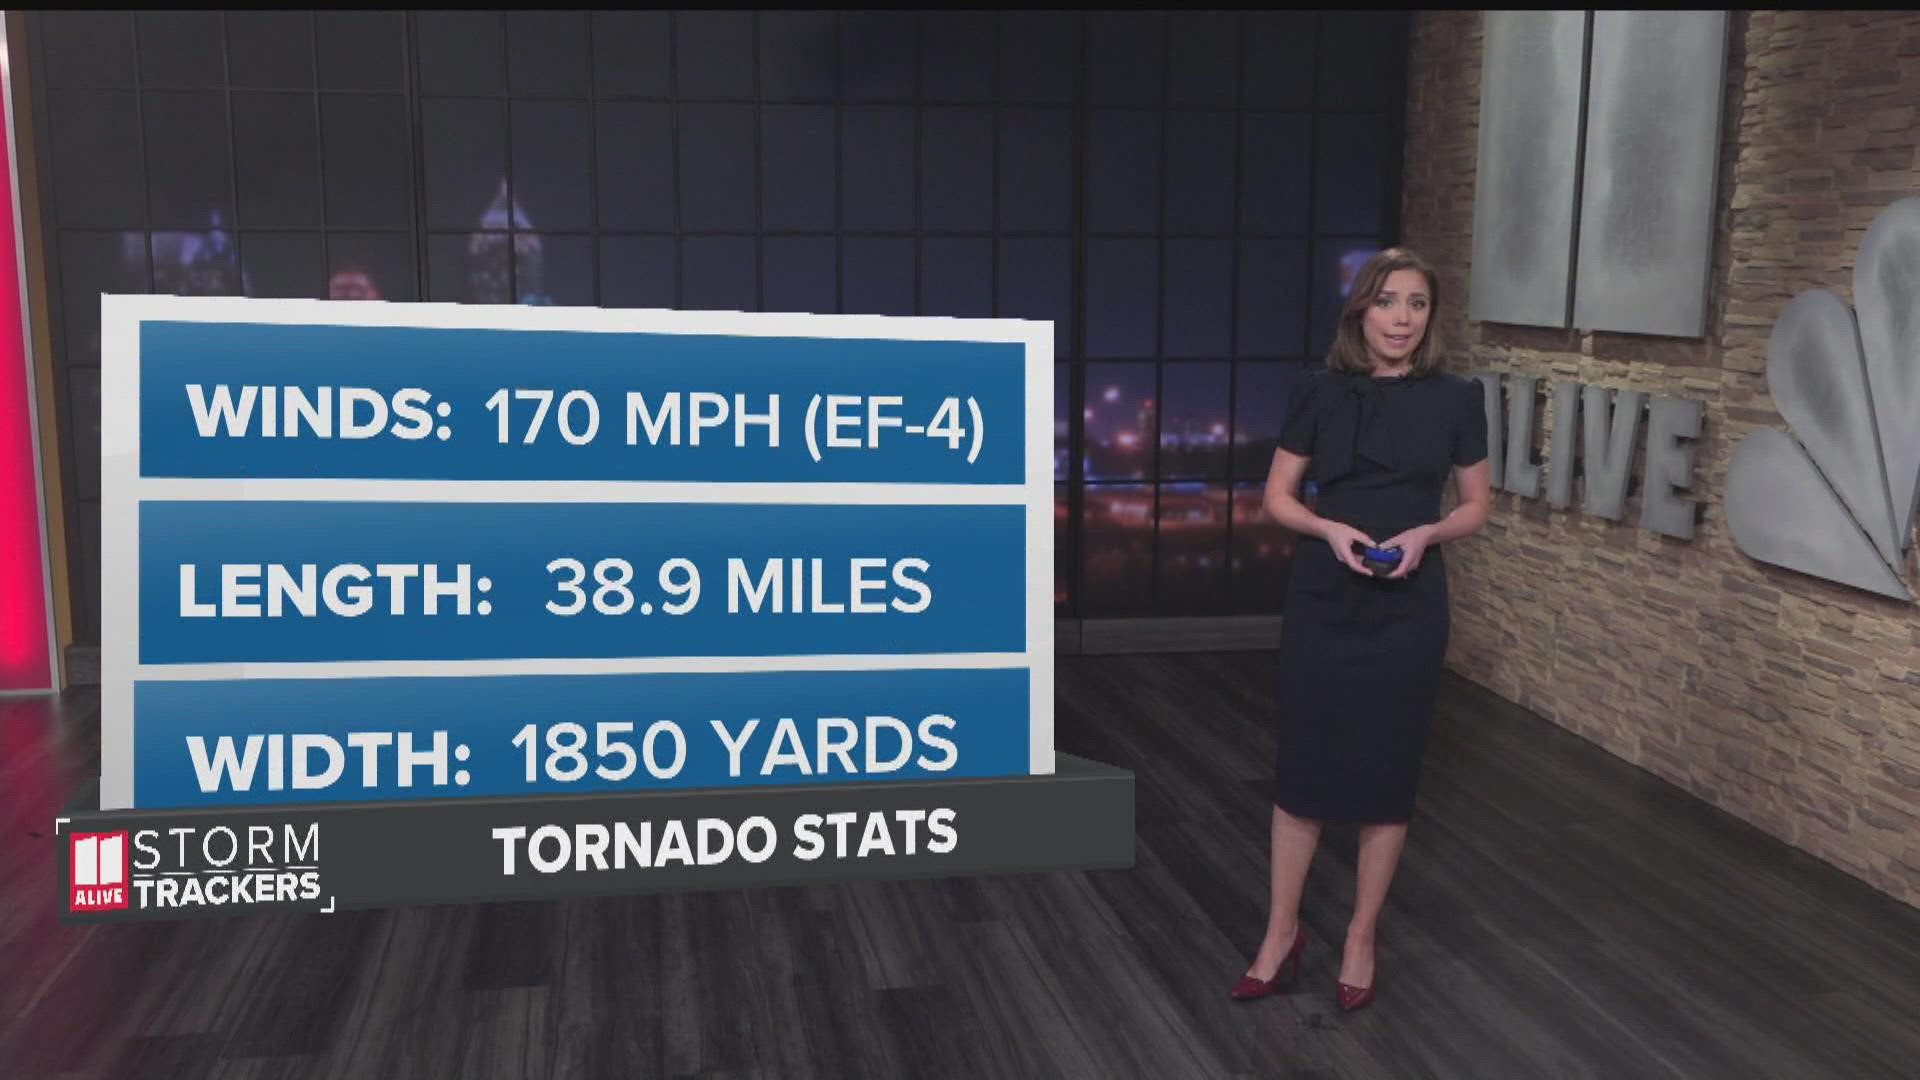 The tornado was on the ground for a total of 39 miles